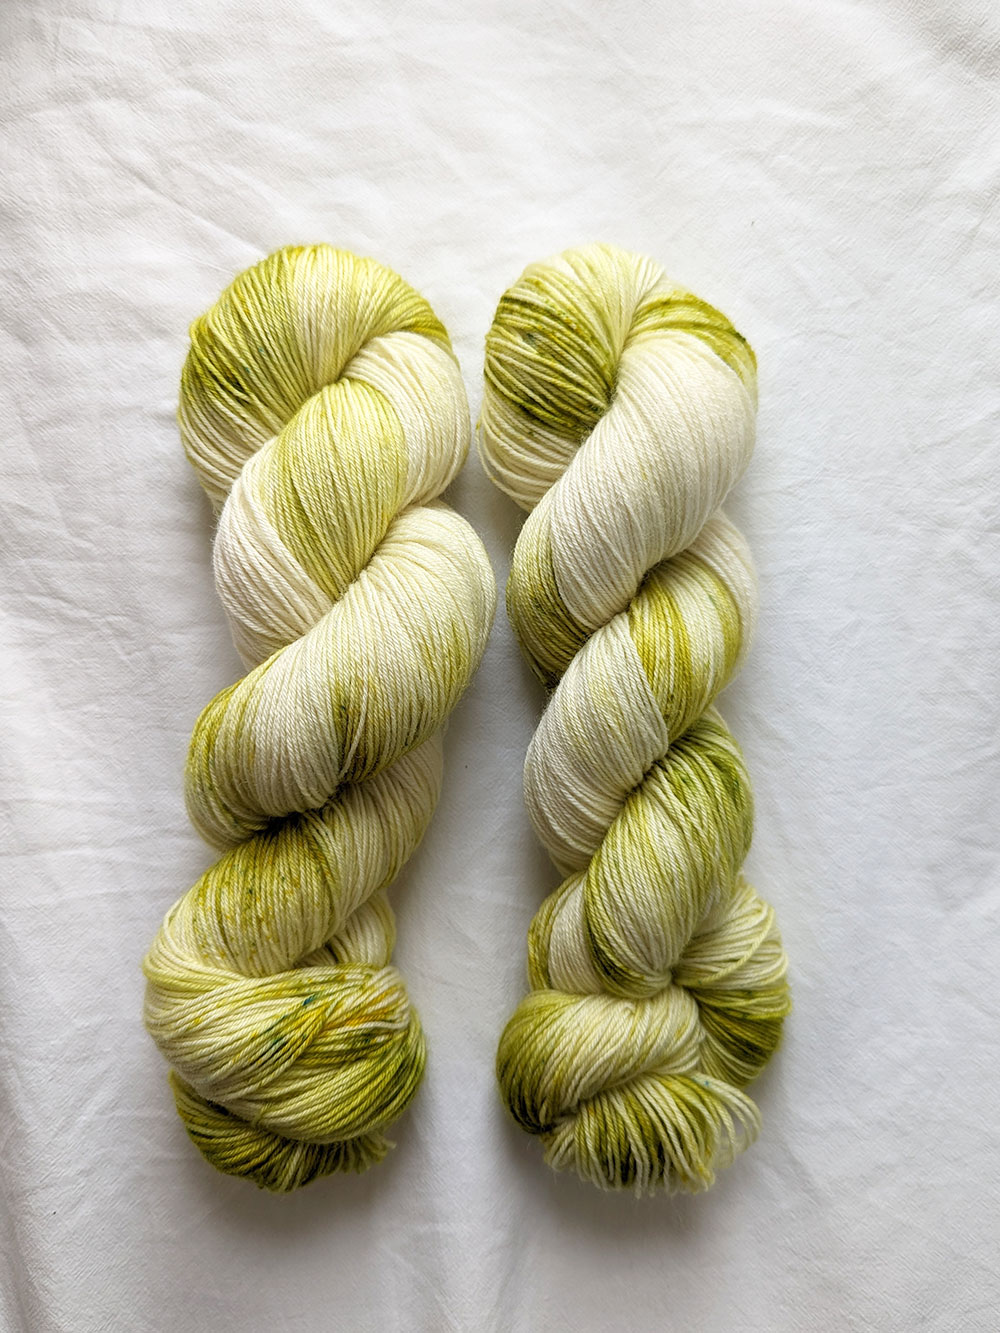 4ply - Olive Green Speckled Hand Dyed Yarn - The Old Horizon